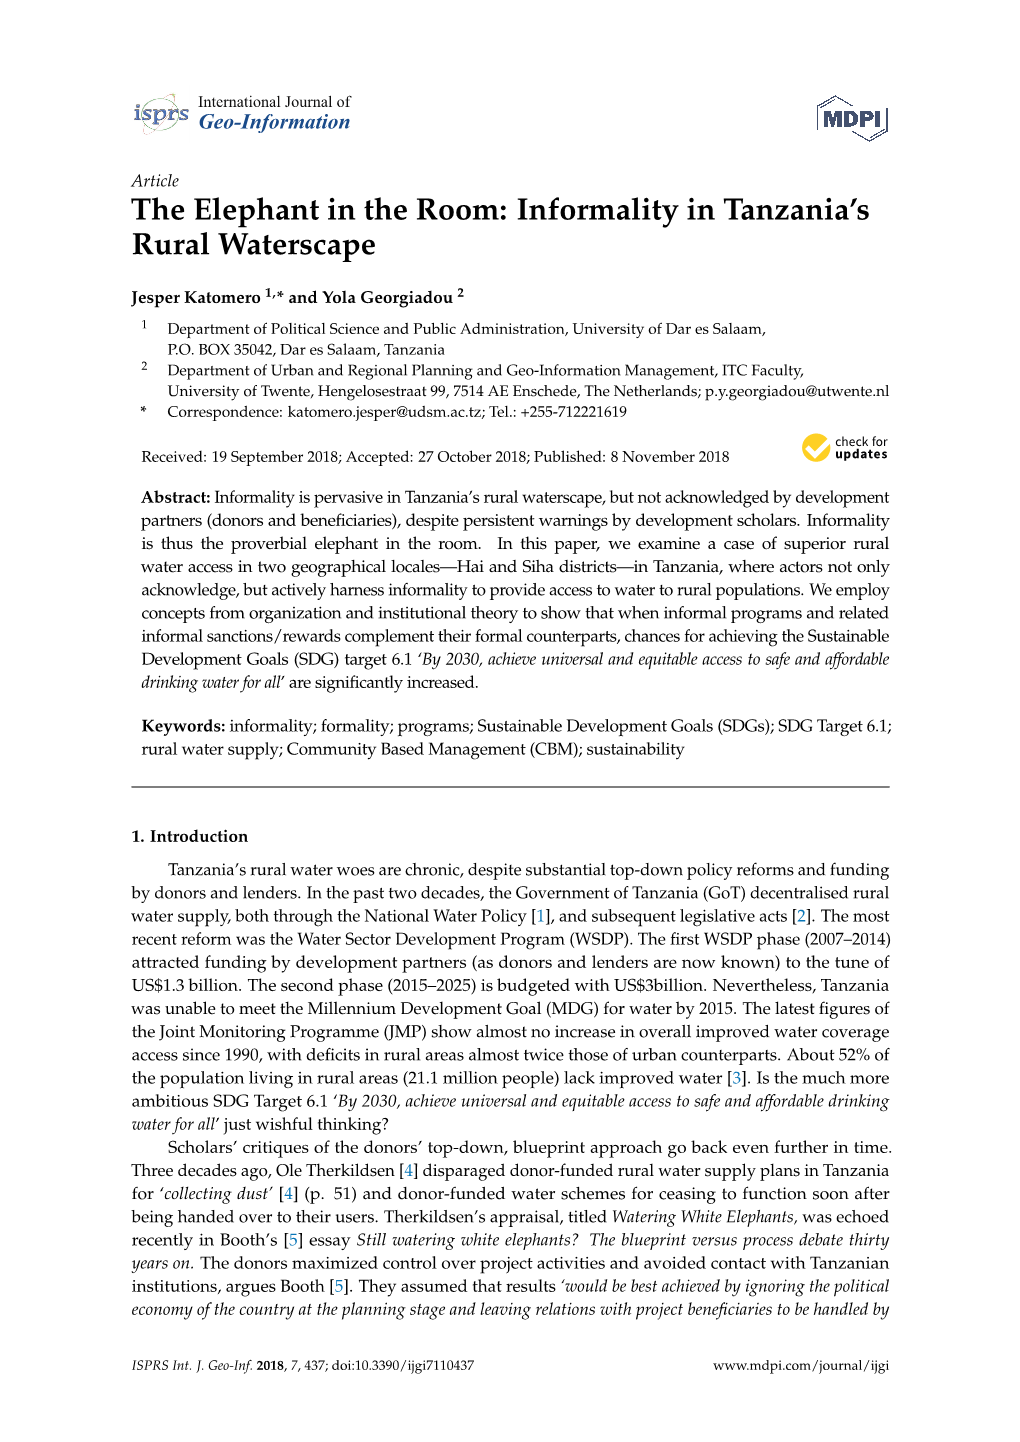 Informality in Tanzania's Rural Waterscape